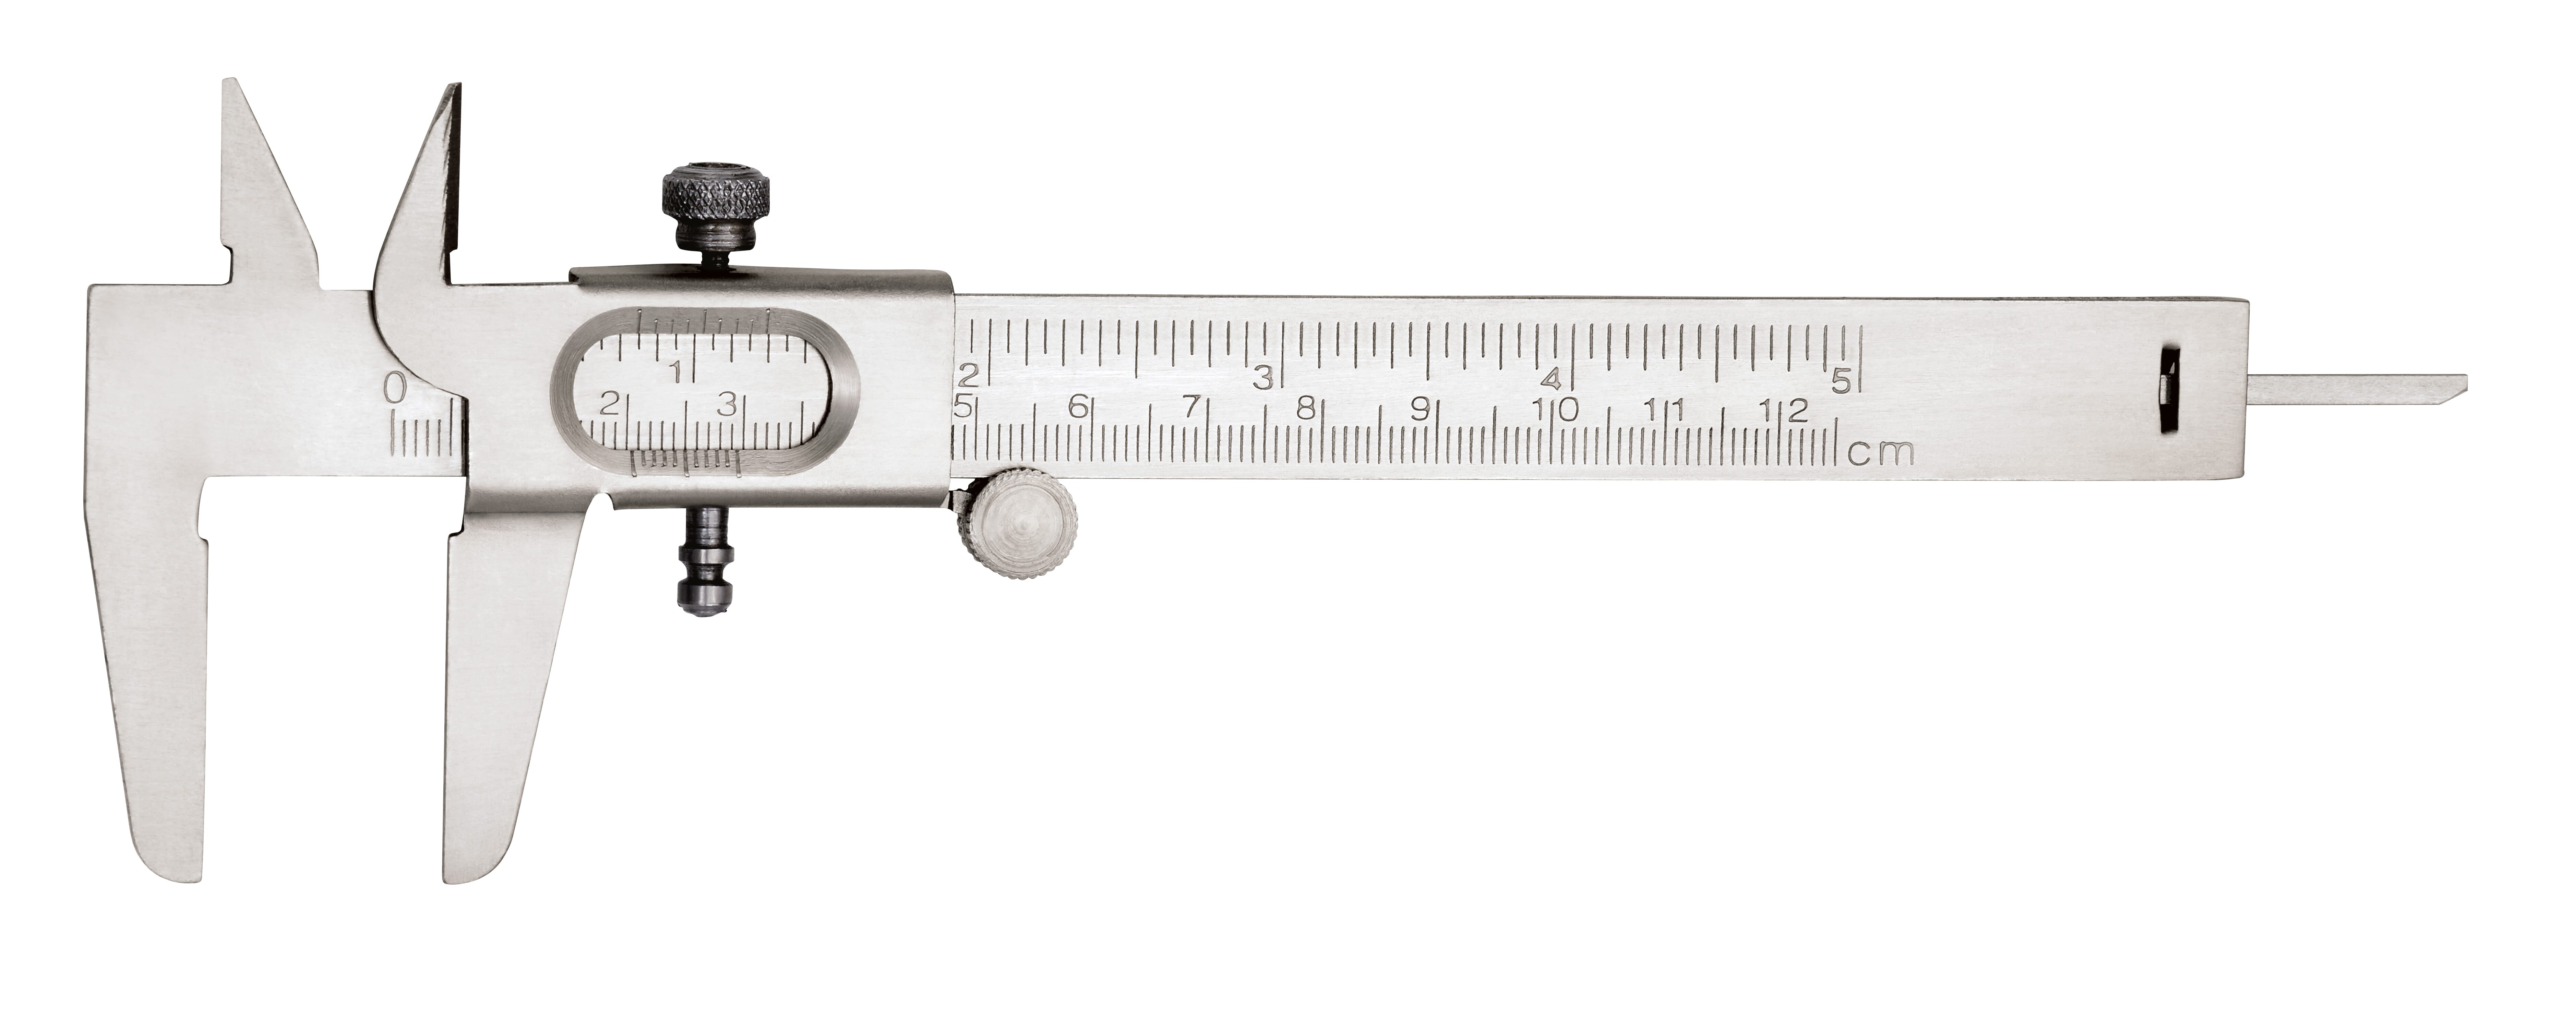 Milwaukee® Empire® 2784 Vernier Caliper, 0 to 5 in Measuring, Graduations 1/16 in, 1-1/4 in D Jaw, Steel, Silver